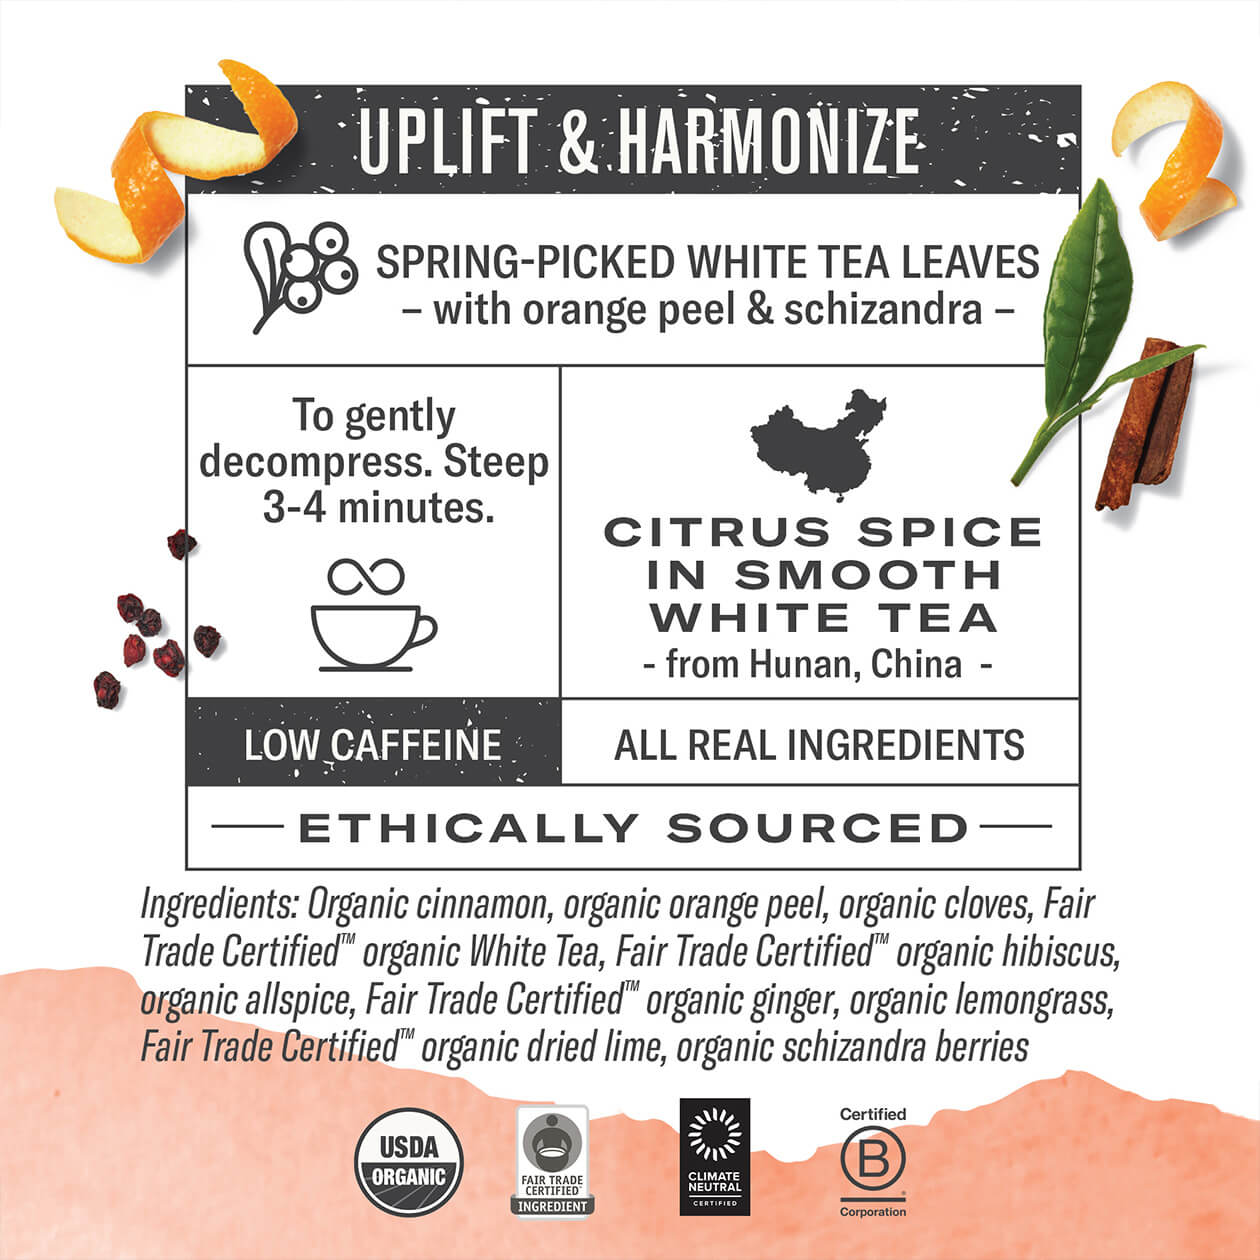 Infographic about Orange Spice: steep 3-4 minutes, origin: Hunan China, low caffeine, all real ingredients, ethically sourced